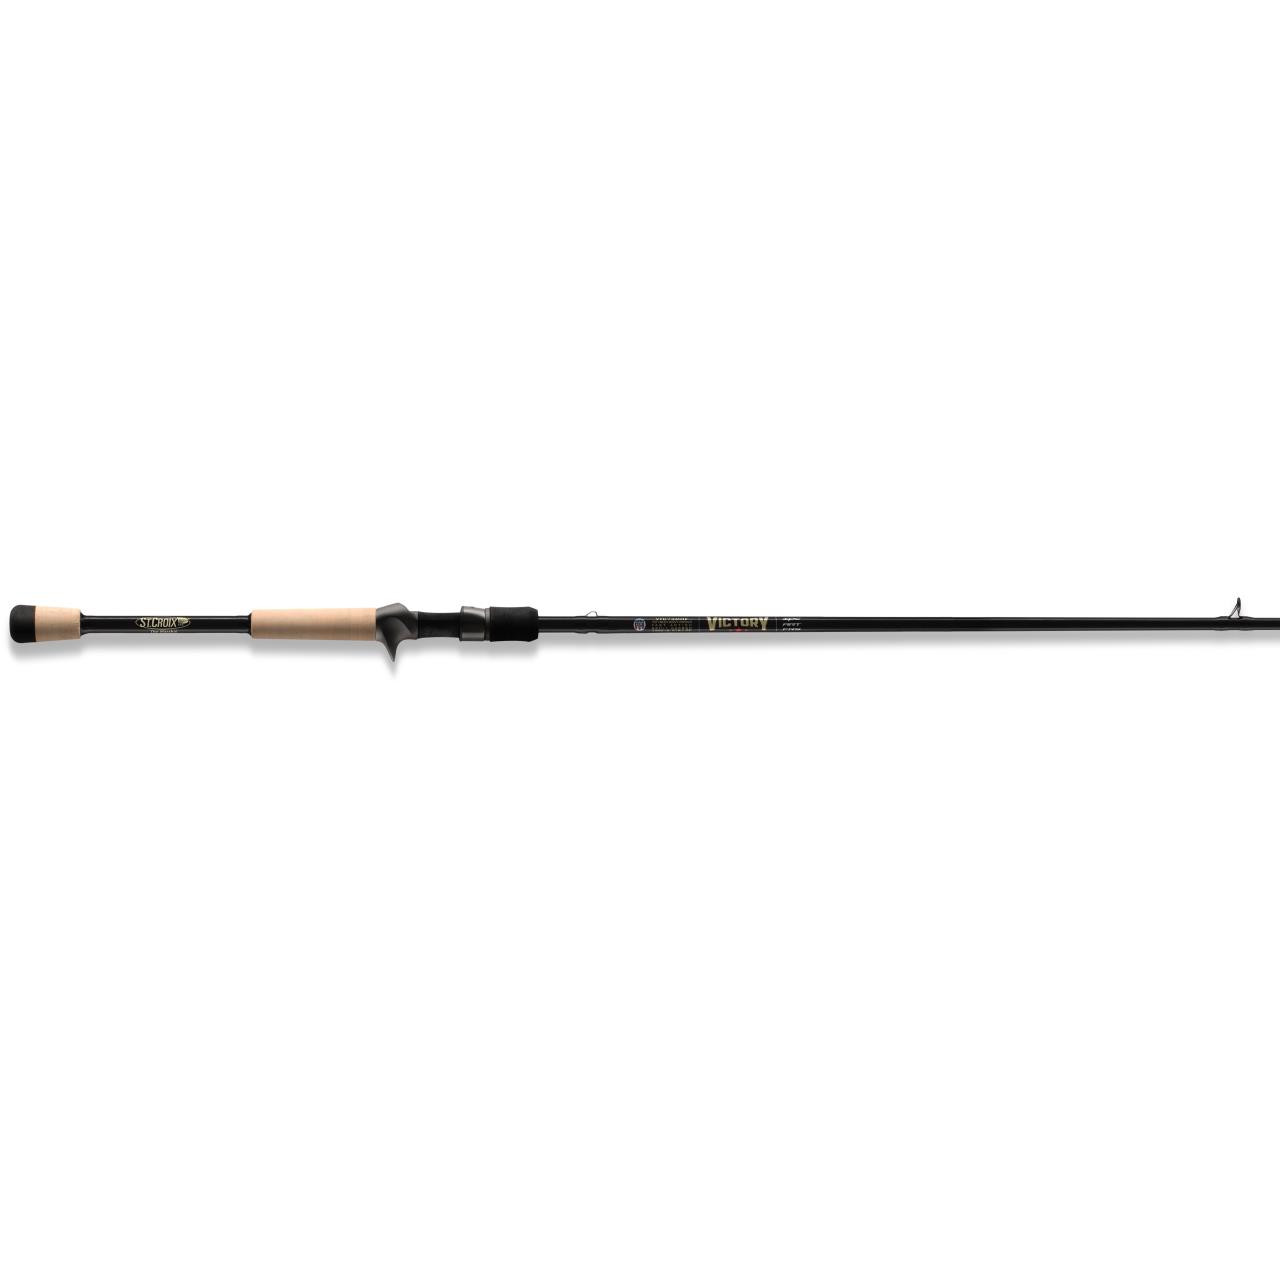 St Croix Victory Casting Rod 7'2 - Medium Heavy Power - Moderate Action